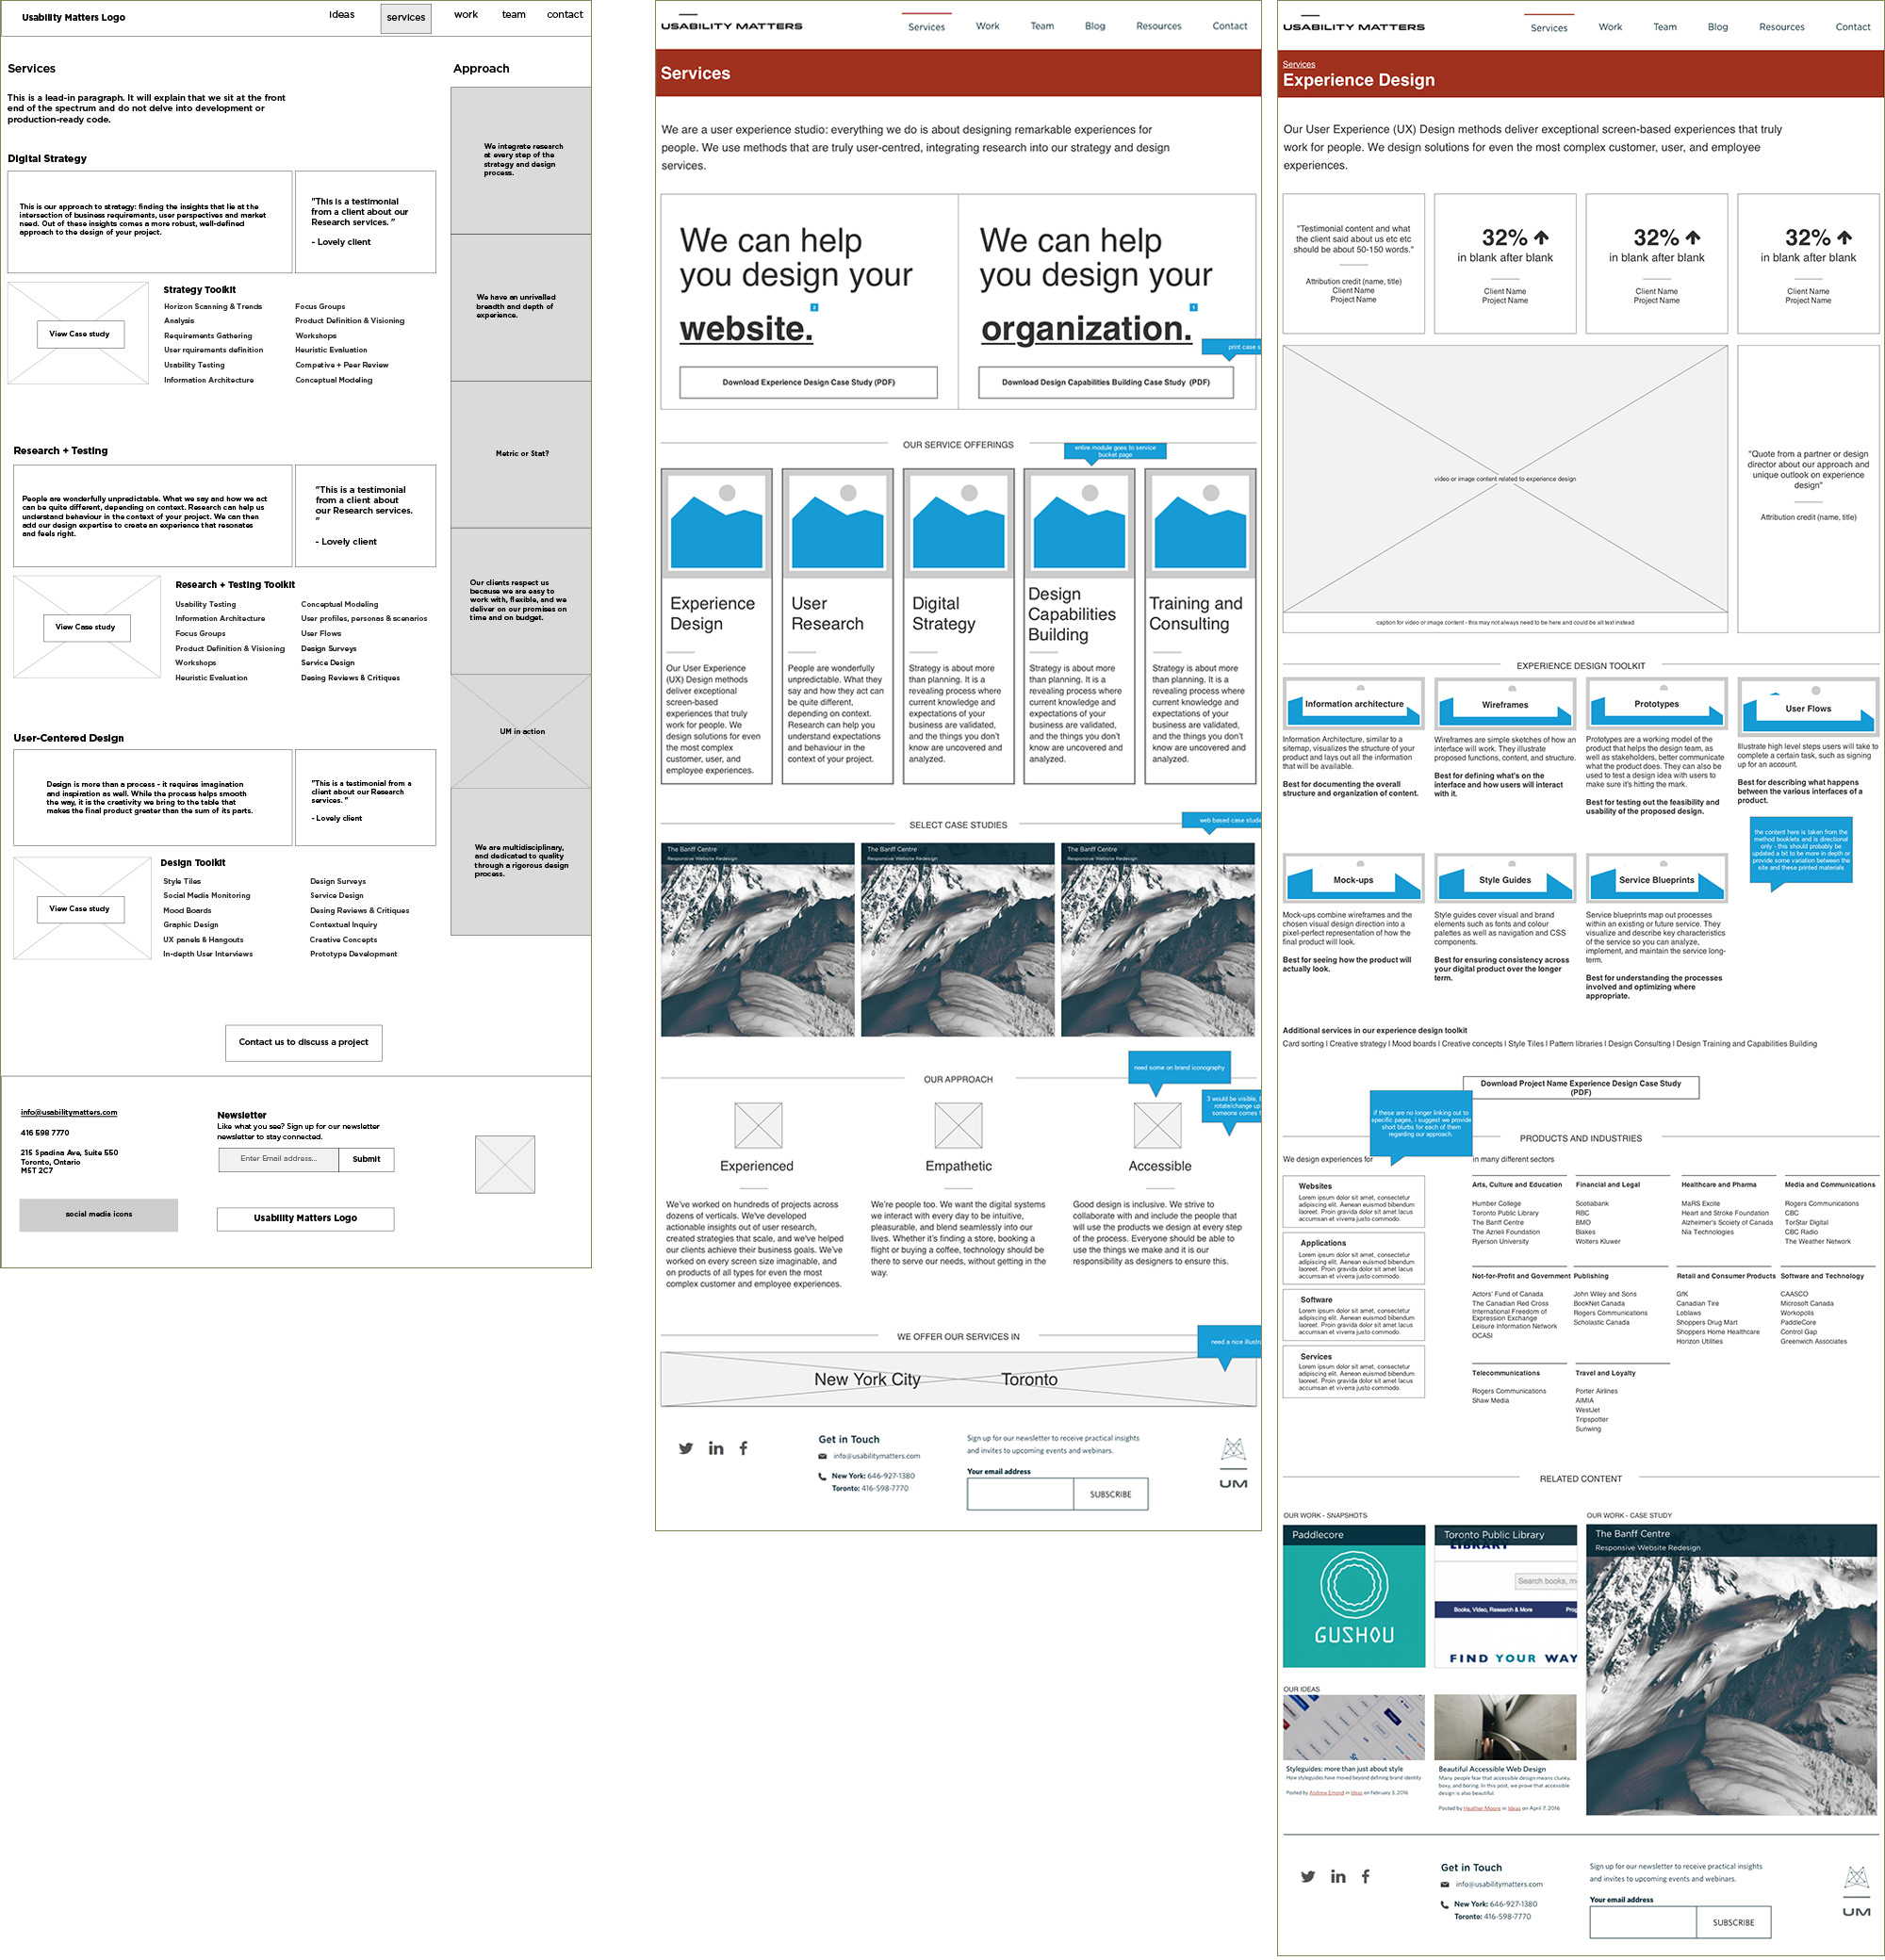 Wireframes of the evolution of the services page.